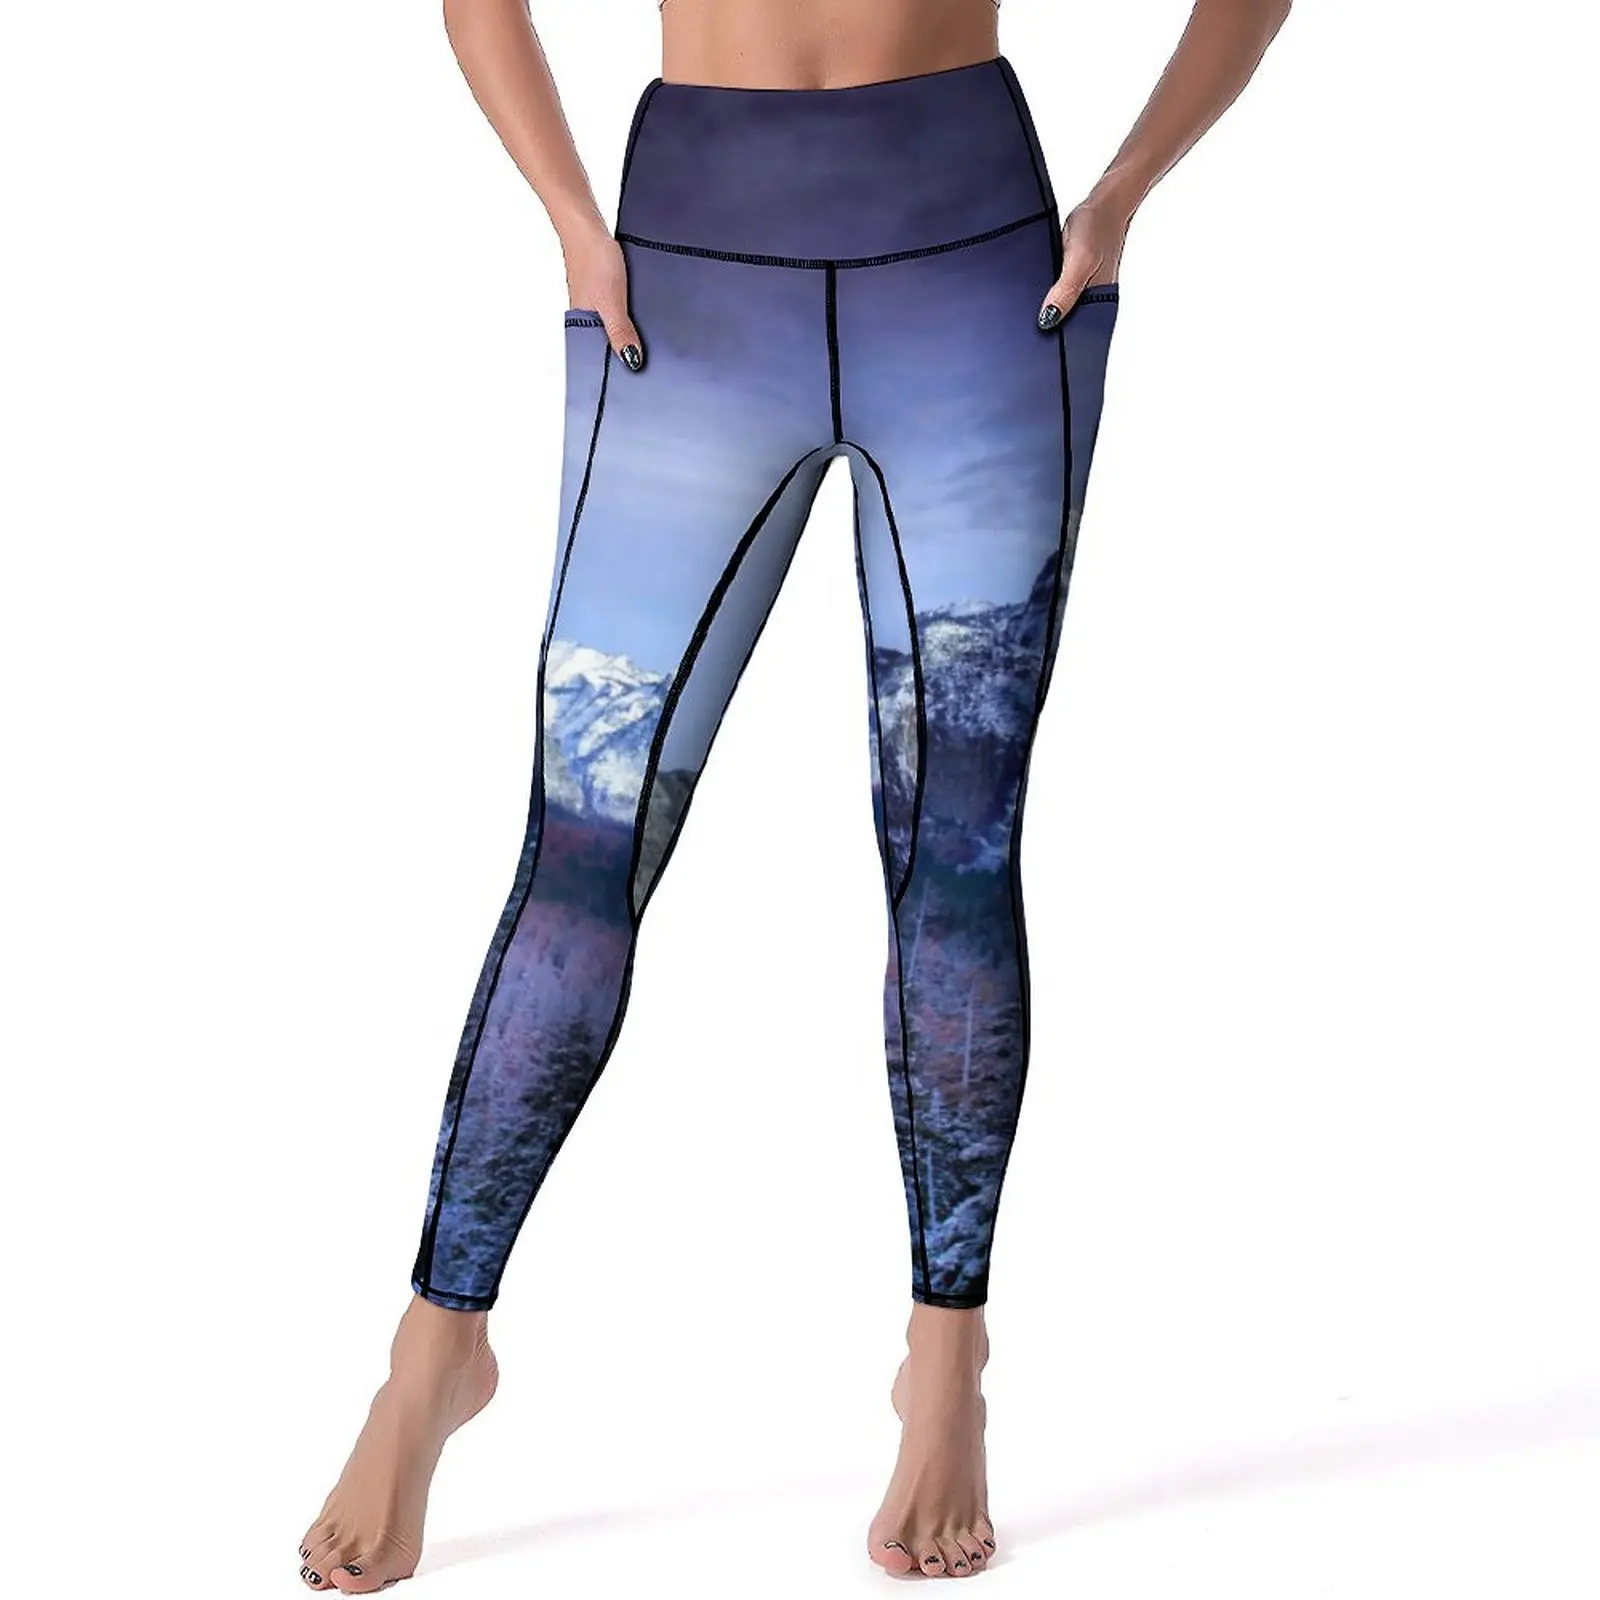 

Violet Mountain Yoga Pants With Pockets Clouds Print Leggings Sexy Kawaii Yoga Sports Tights Stretchy Graphic Fitness Leggins